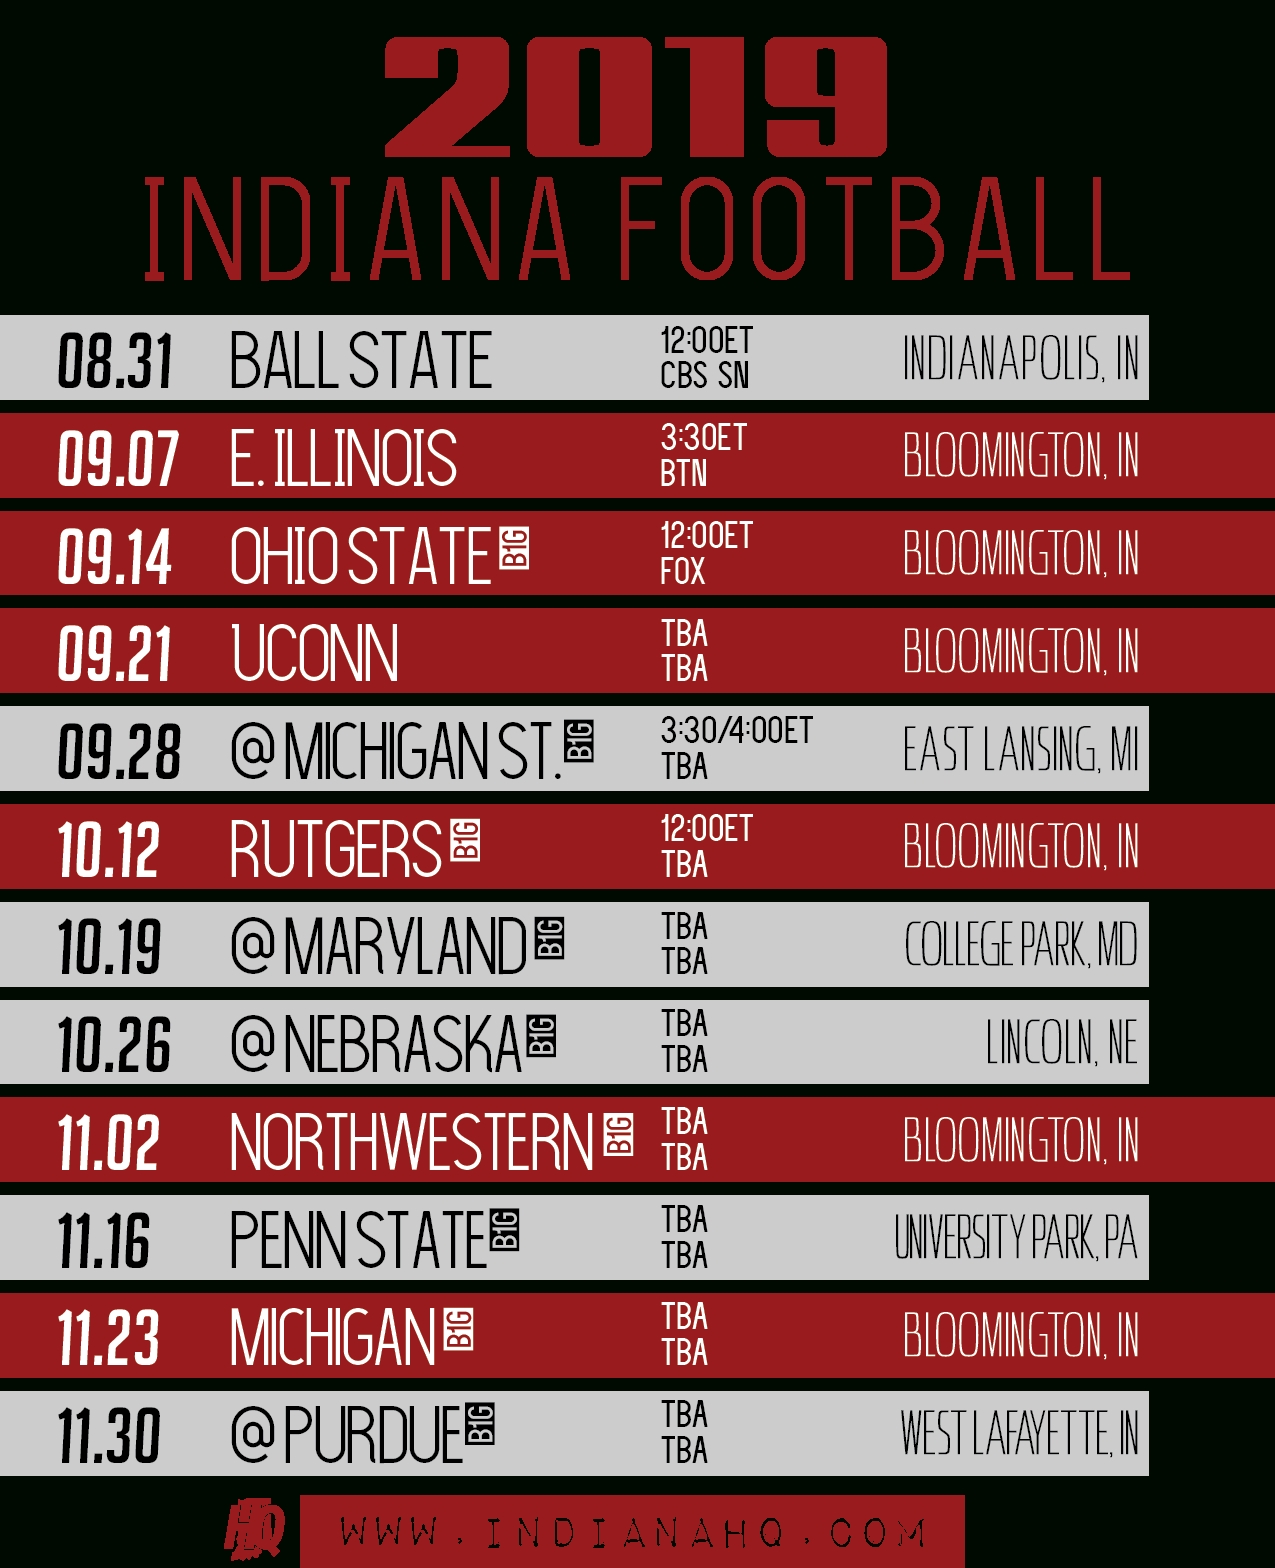 2019 Indiana Football Schedule (Printable) - Indianahq